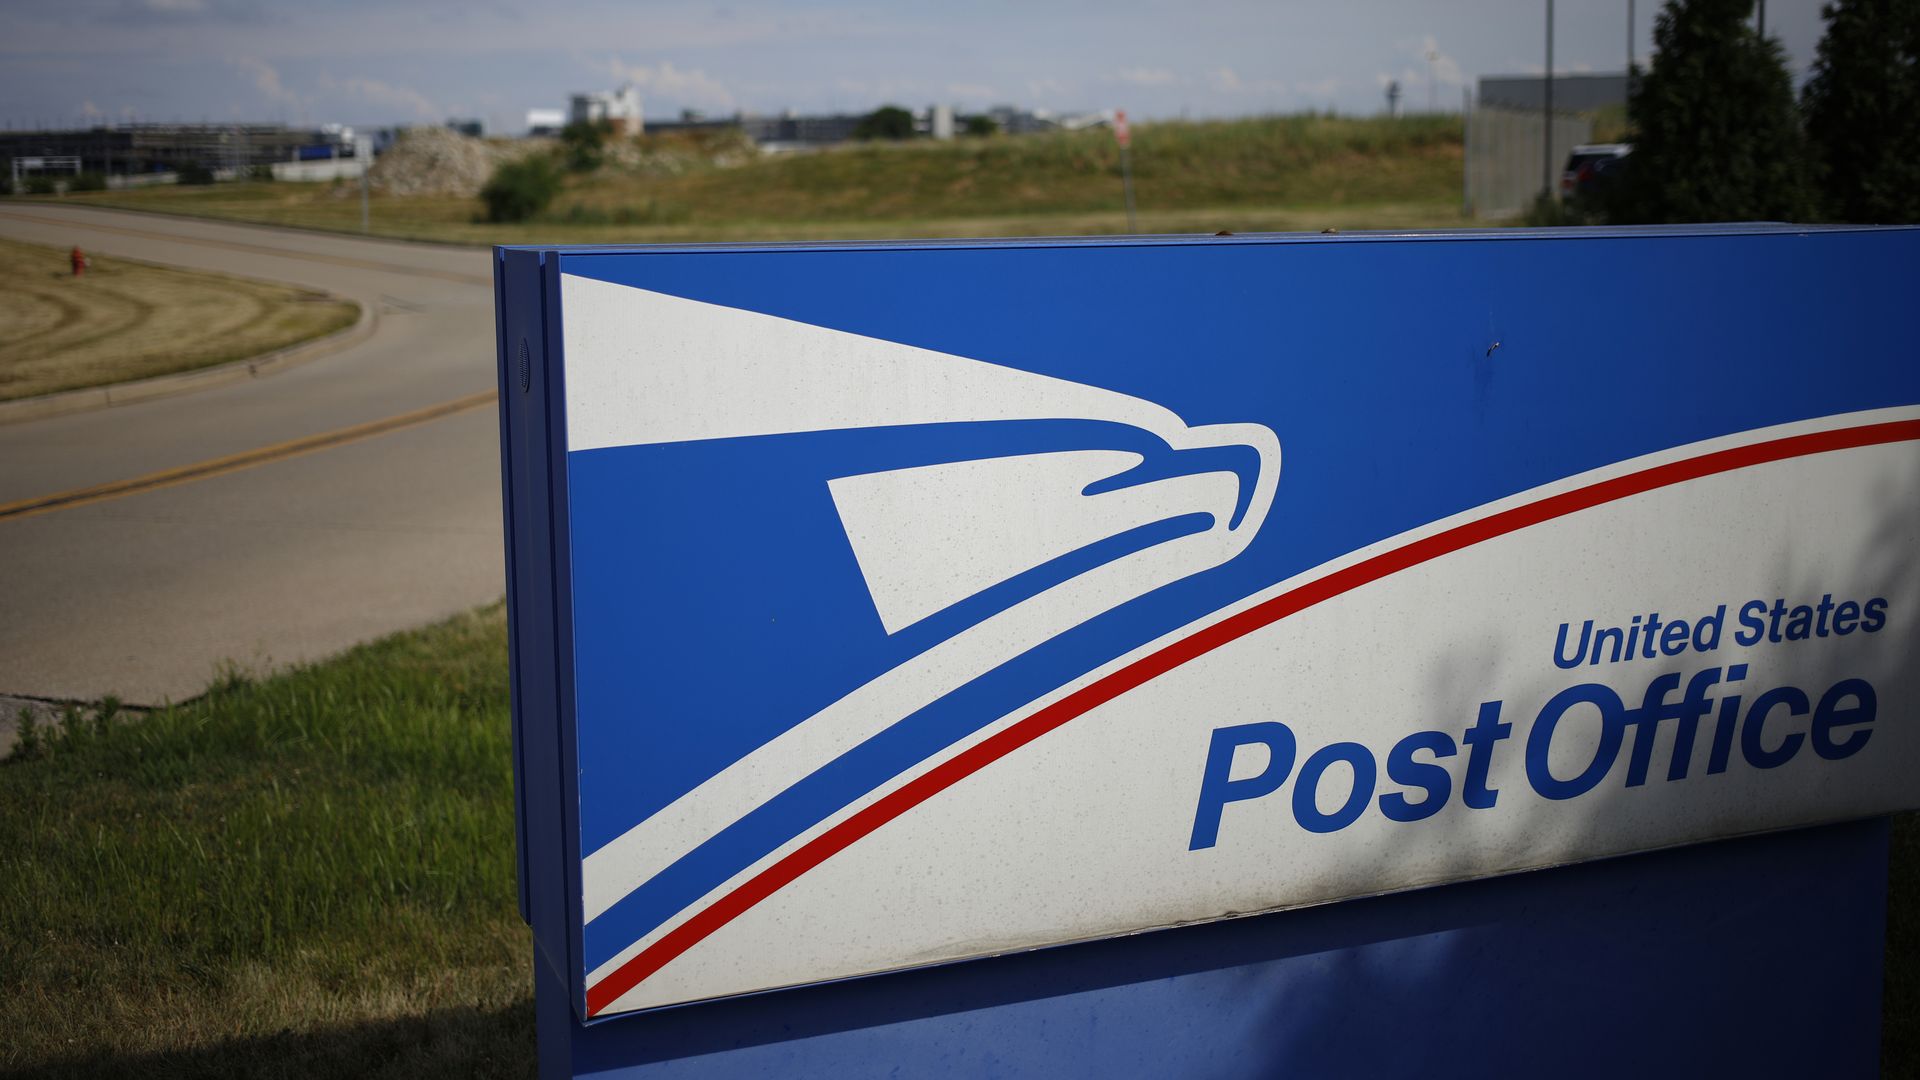 Cost Of USPS Stamps Rises 